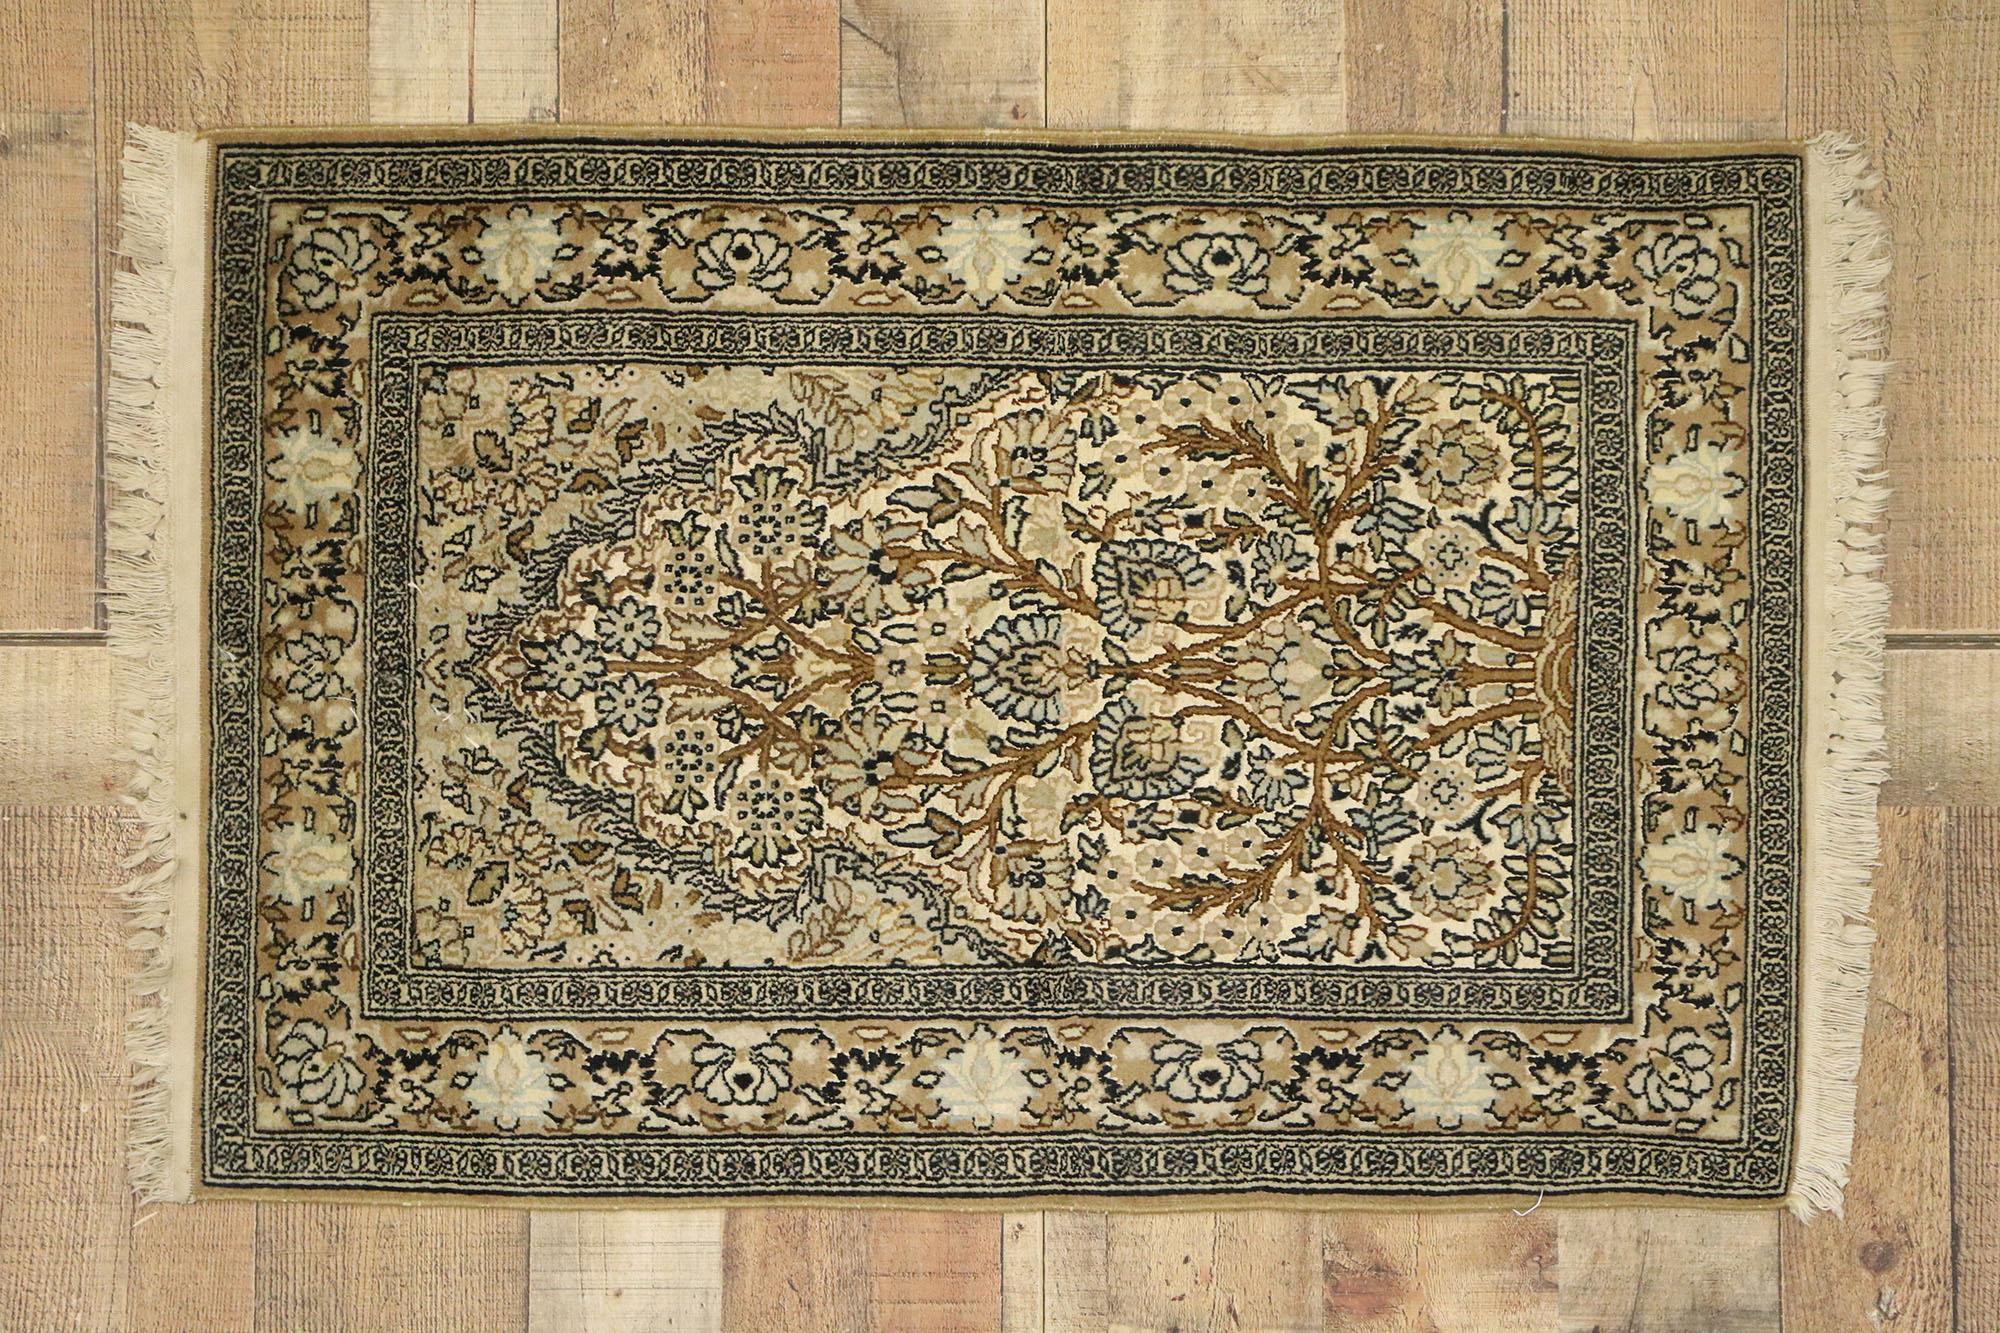 Vintage Pakistani Persian Style Prayer Rug with Directional Layout Design 1